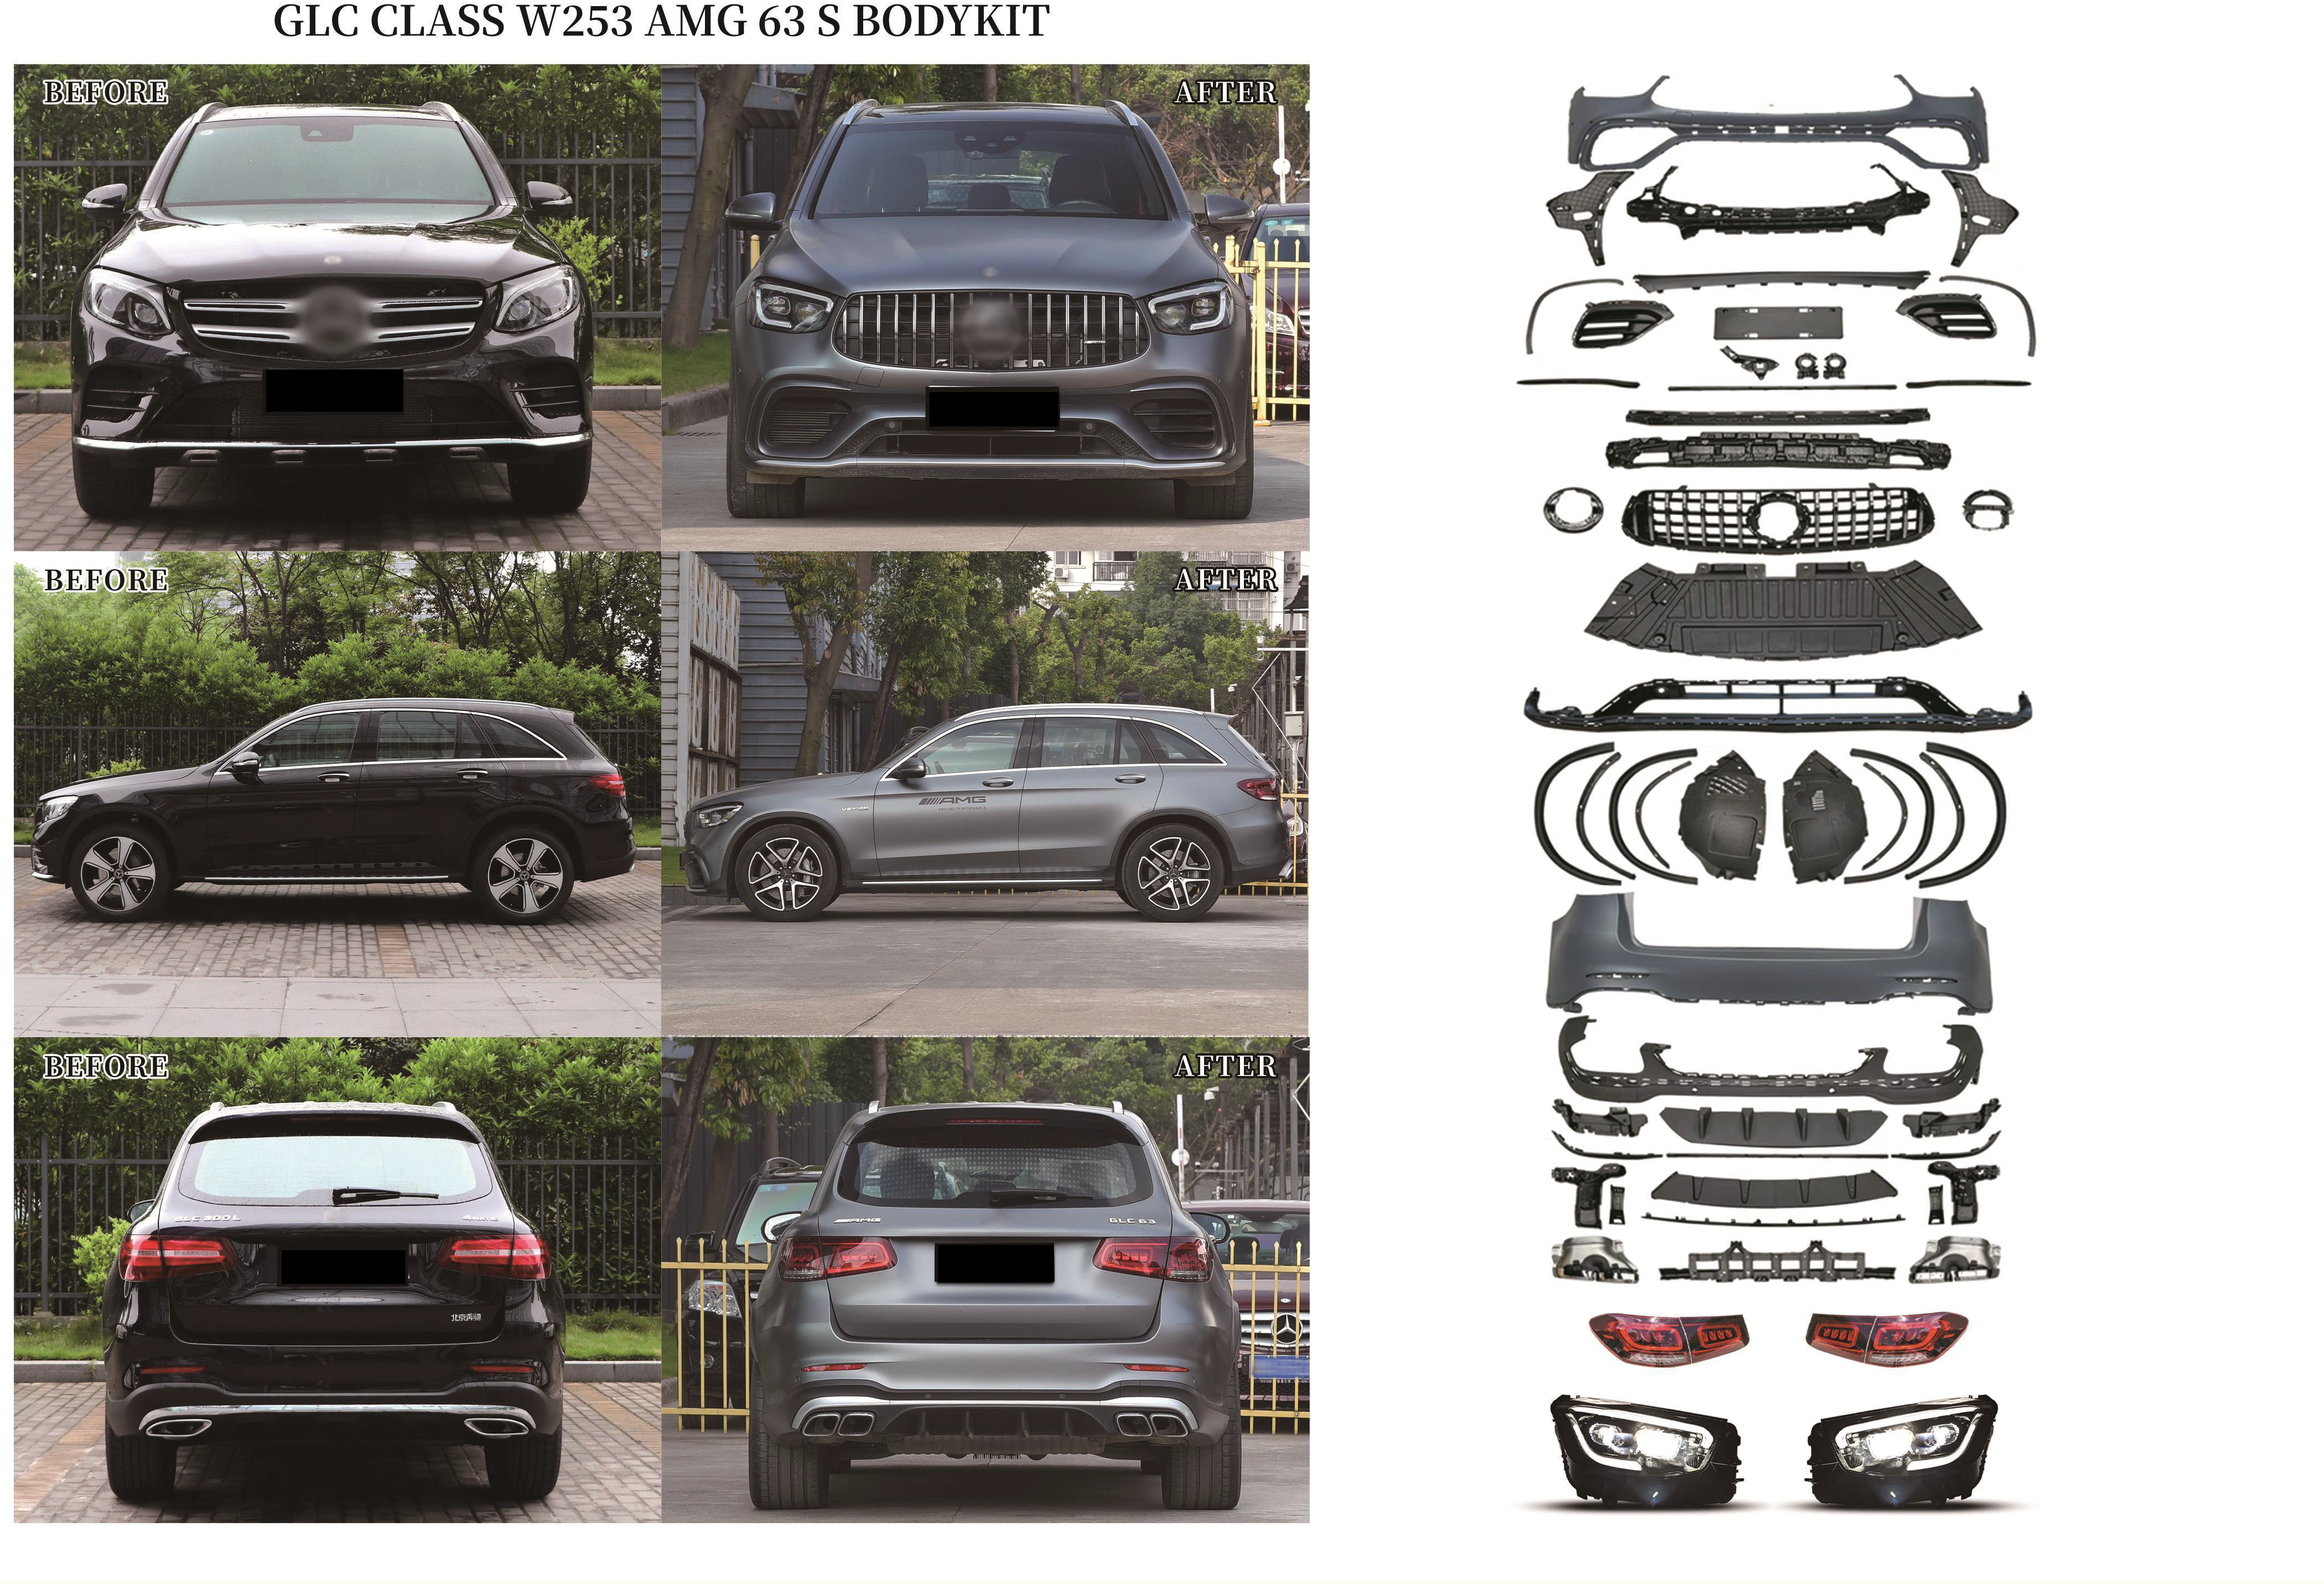 Popular Hot Sale Newest Car Body Kit for Mercedes Benz Glc Class X253  2016-2019 Transform Into Glc63 Amg Style - China Bumper, Grille